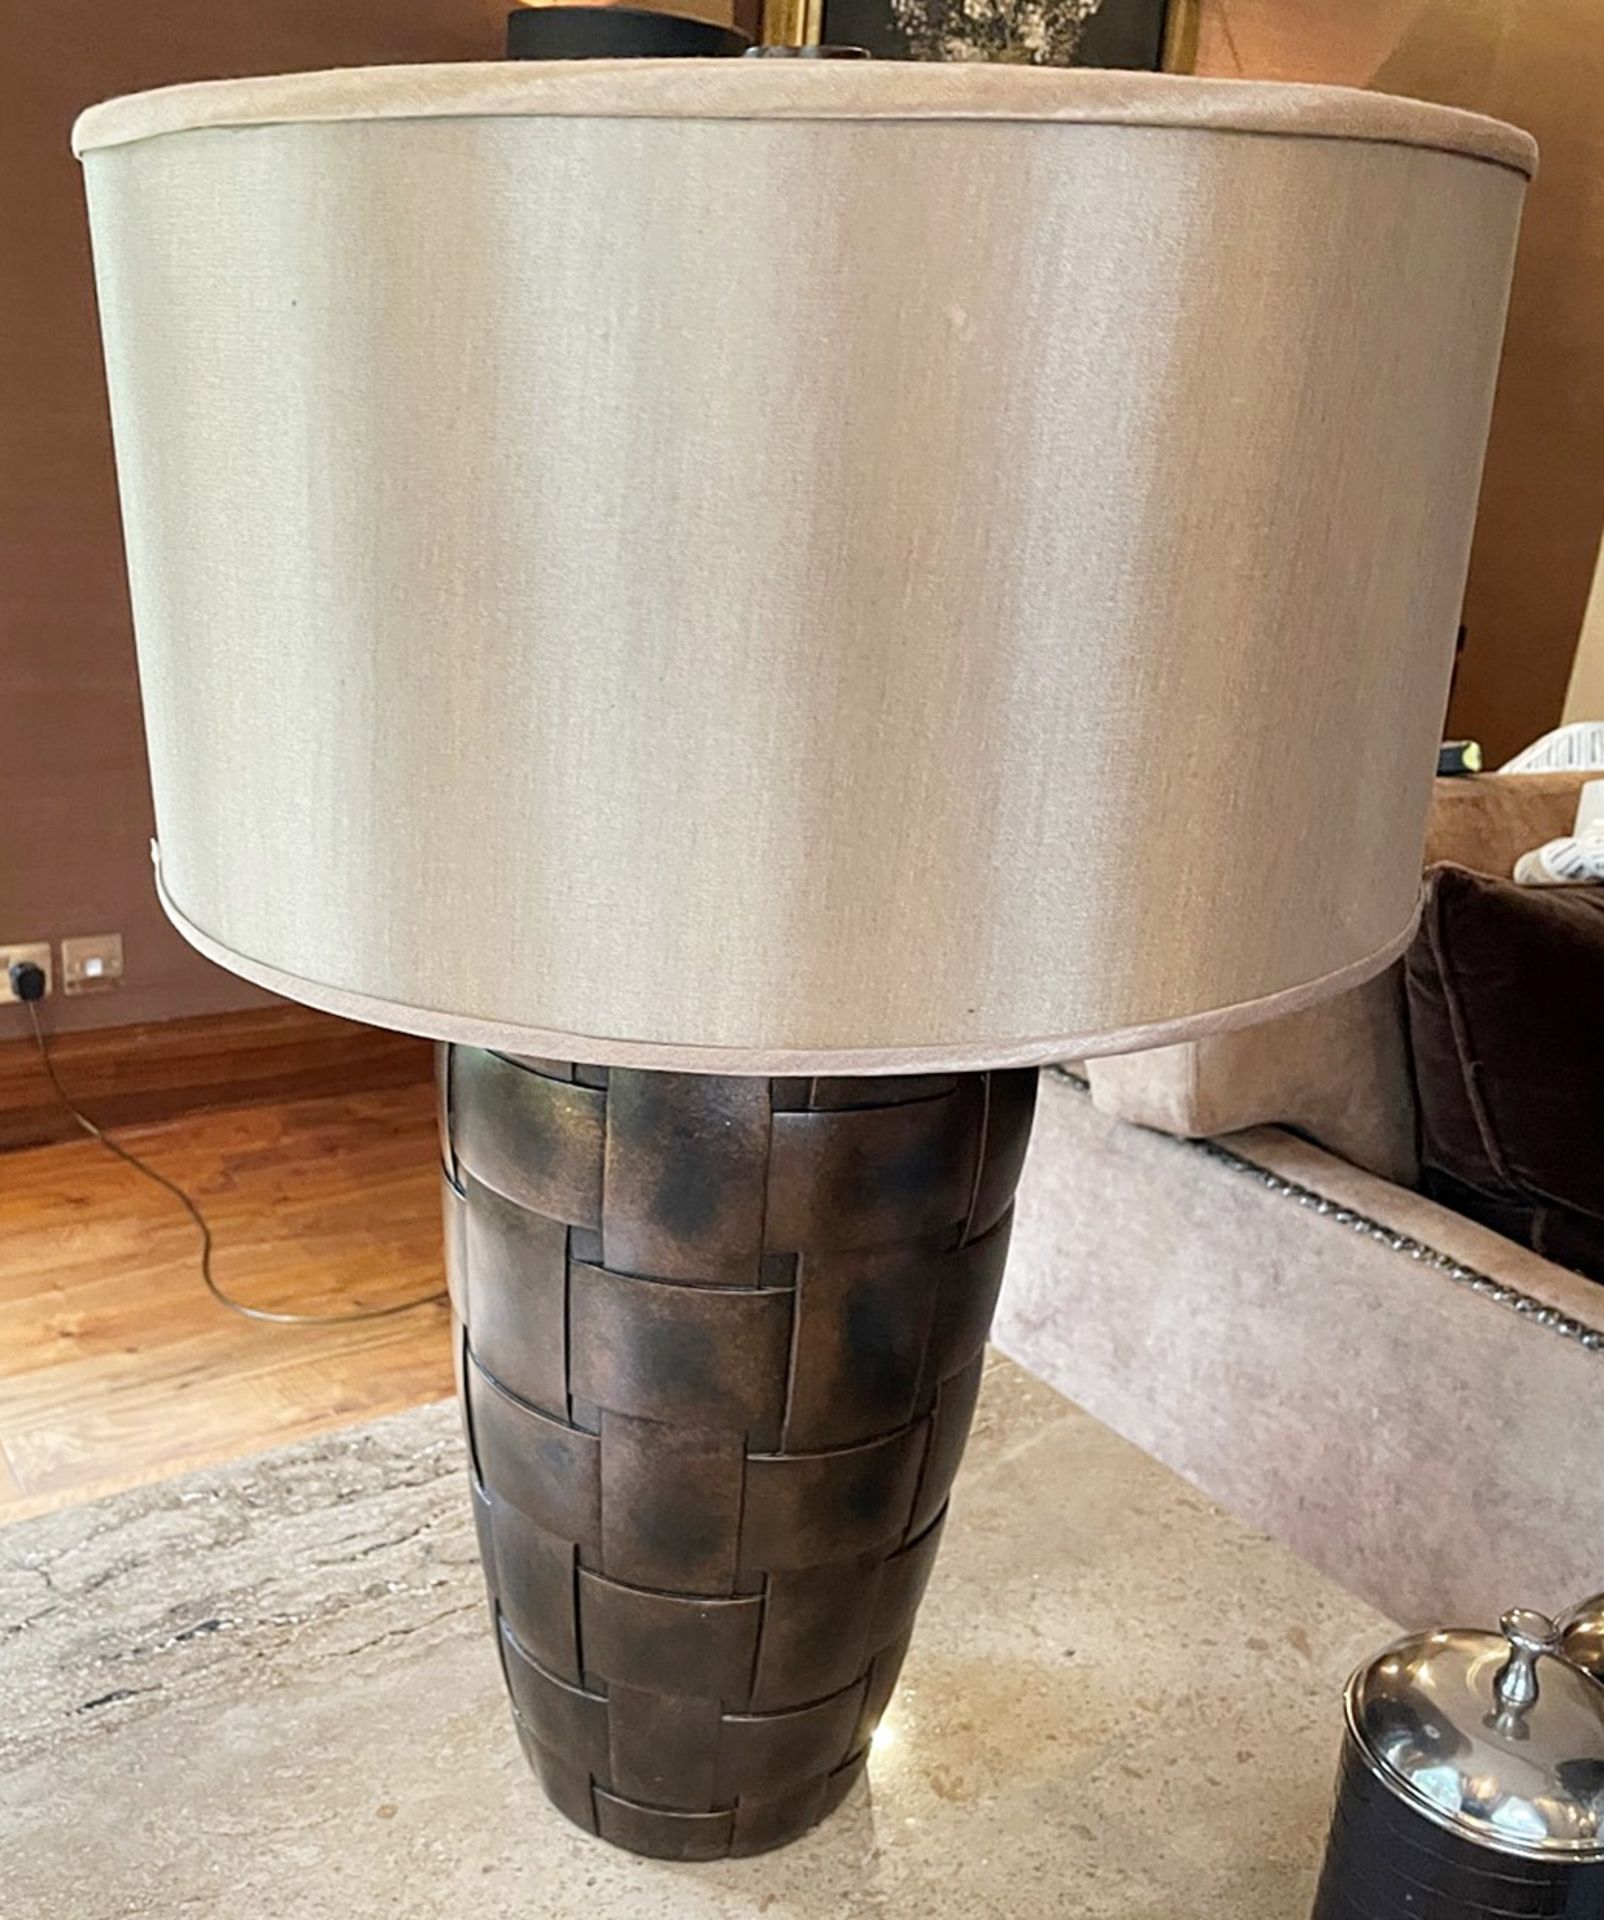 1 x Table Lamp With A Woven-style Base With A Bronze Finish, And Silk Shade - Image 7 of 7